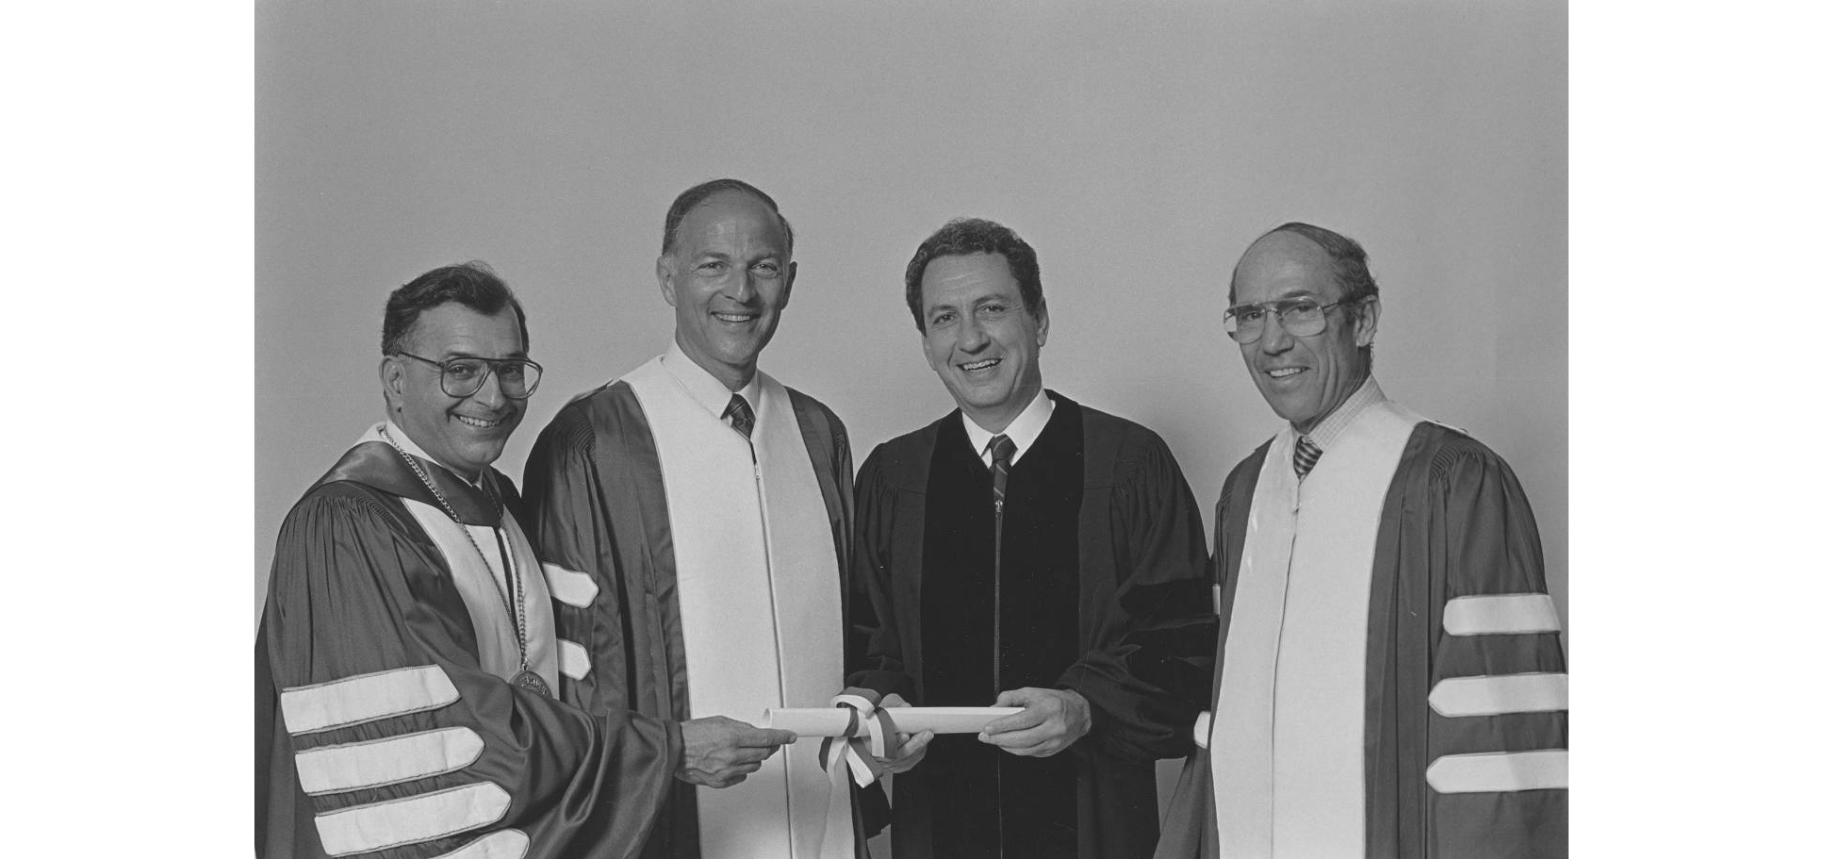 Temple University commencement ceremony for the graduating class of 1986. From left to right: President Peter J. Liacouras, Edward H. Rosen, Arlen Specter, and Richard J. Fox.